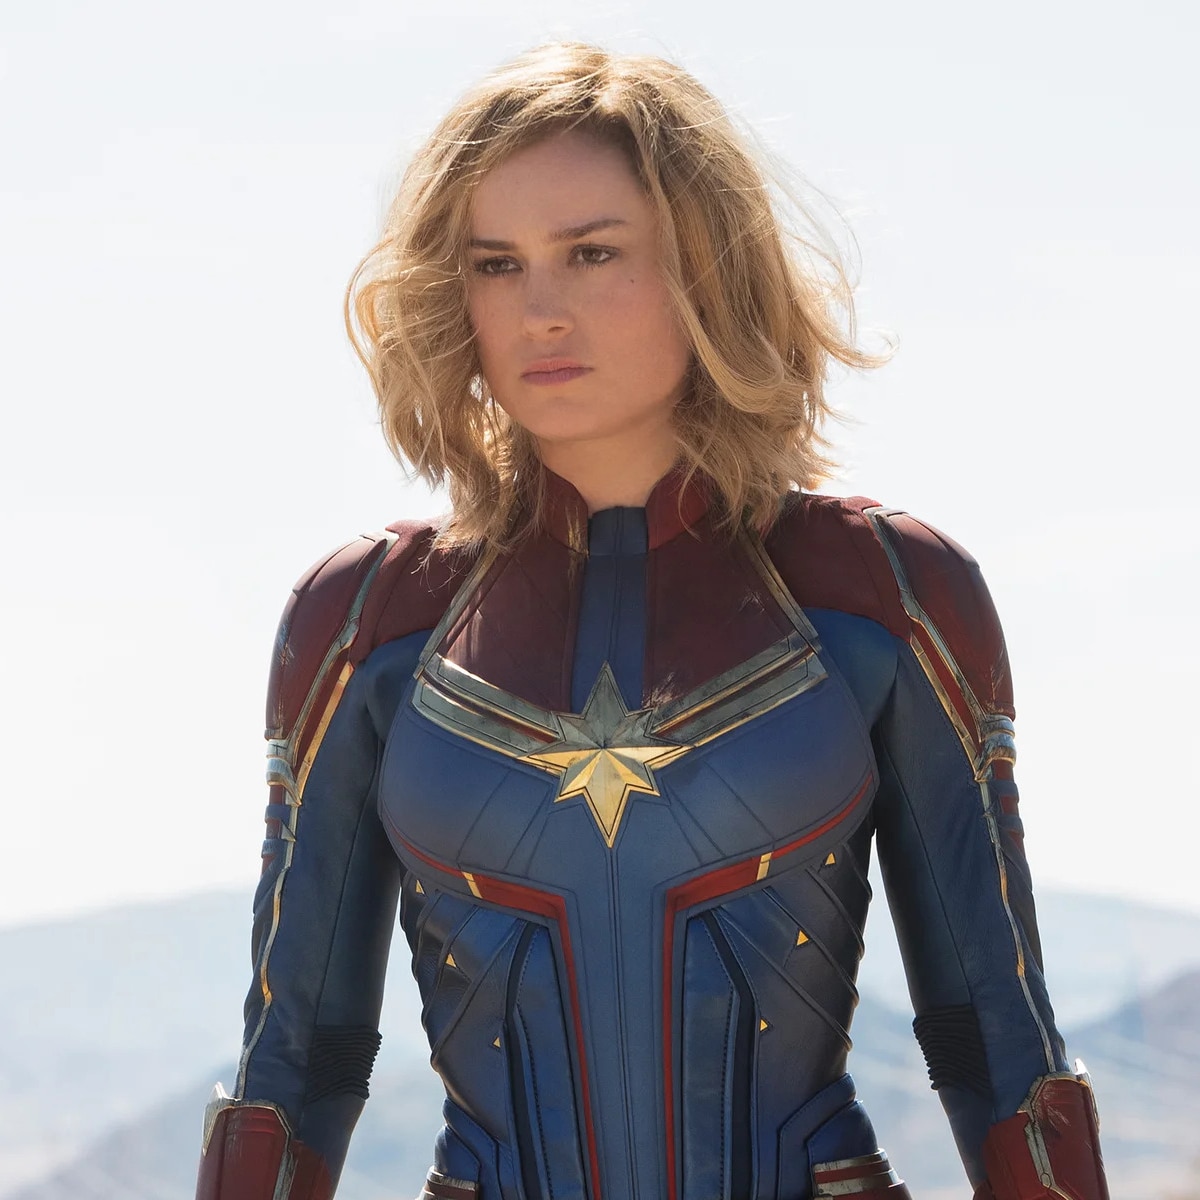 Why Brie Larson Says Making Marvel Movies Is "Redemptive" - ET News